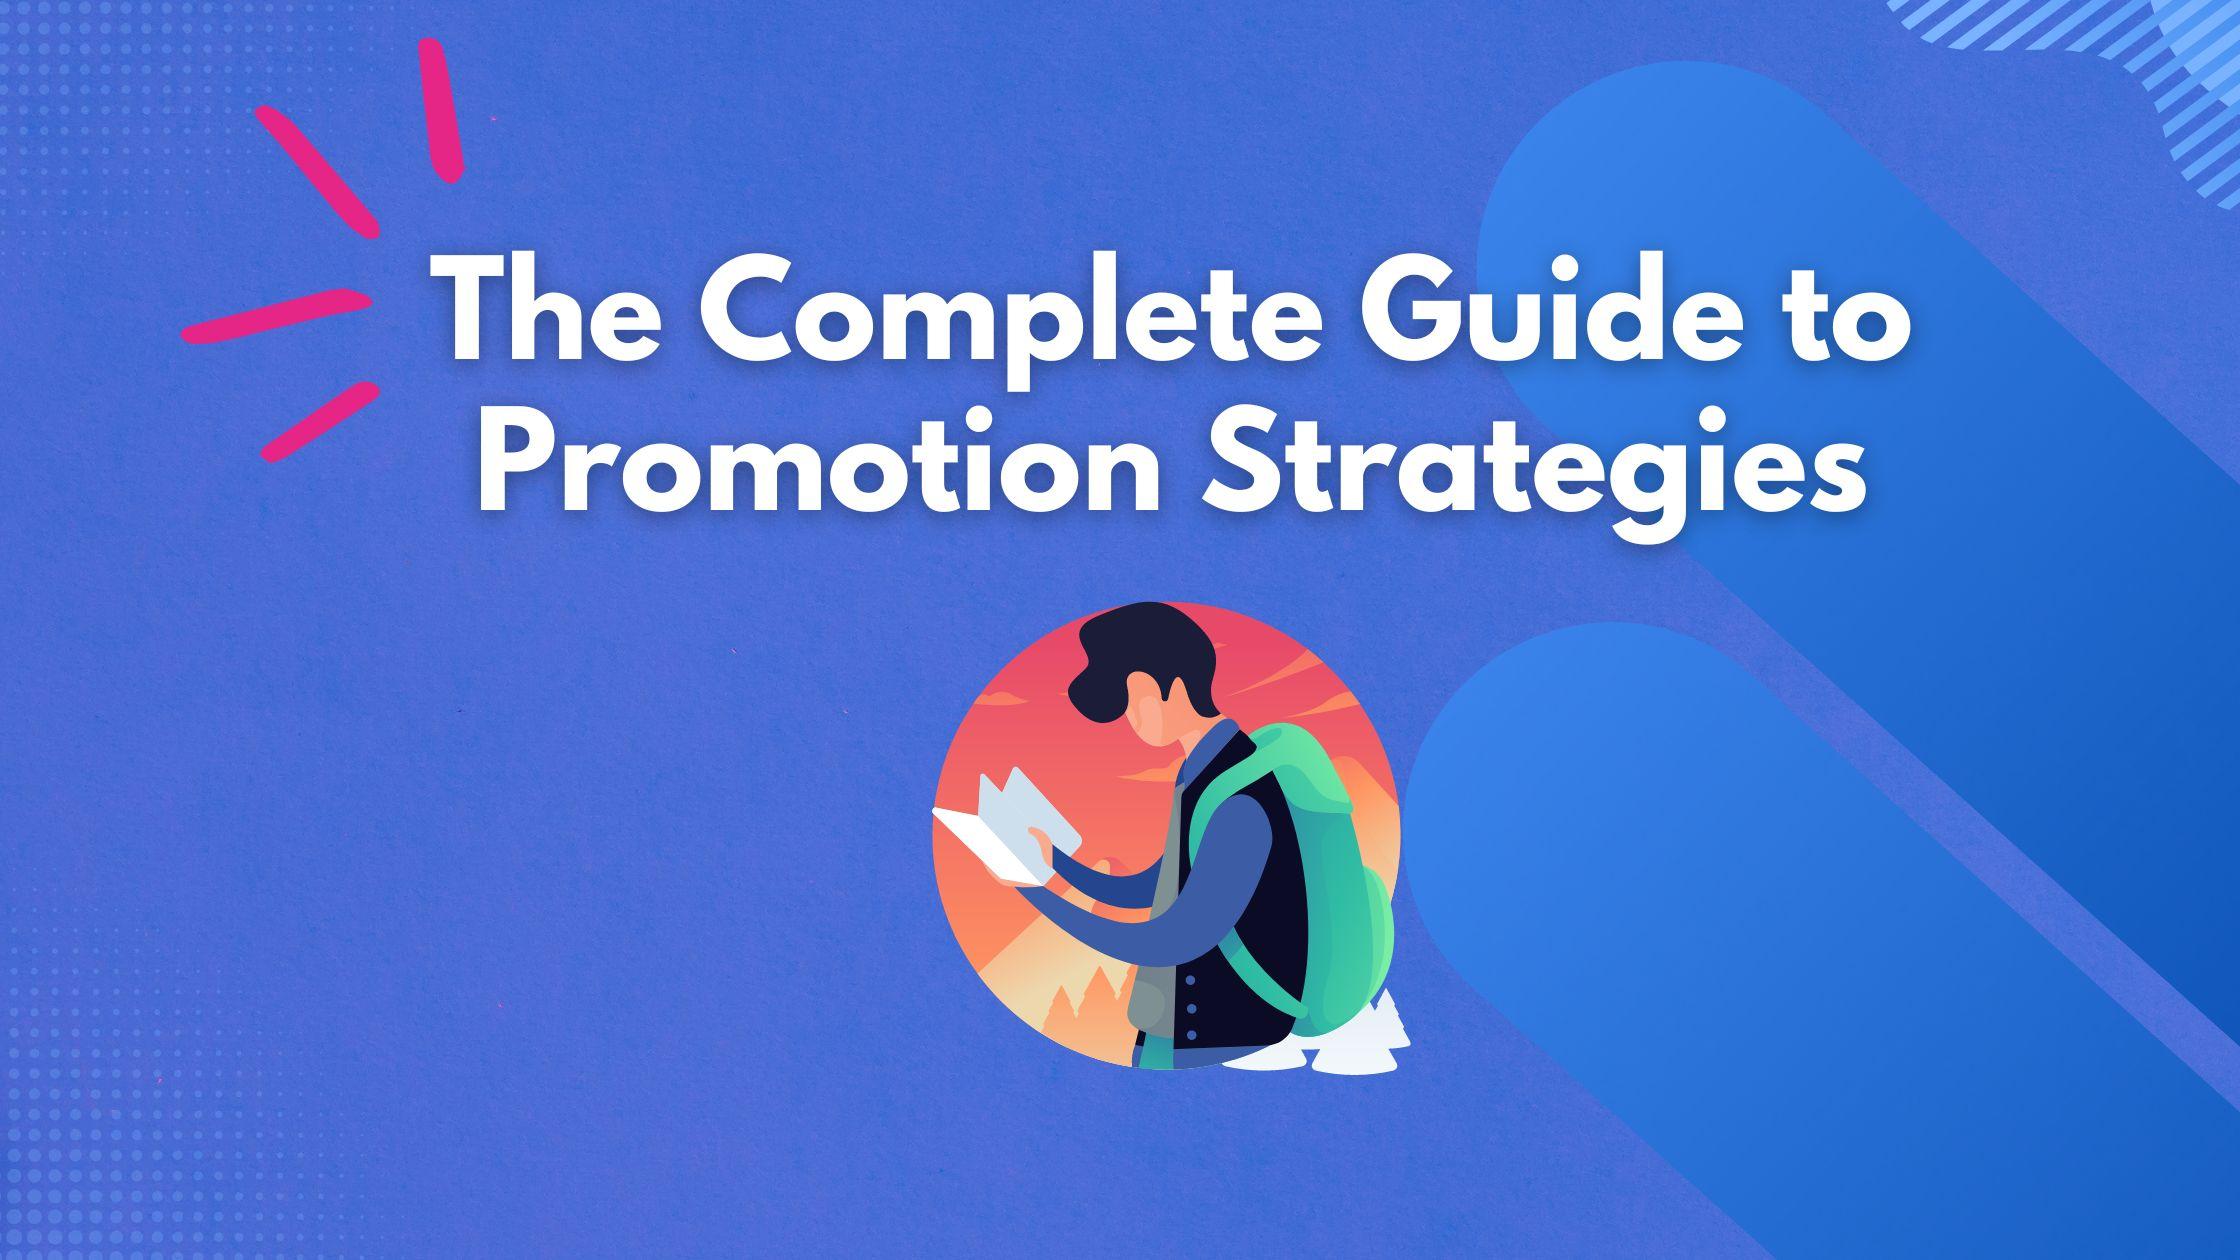 The Complete Guide to Promotion Strategies